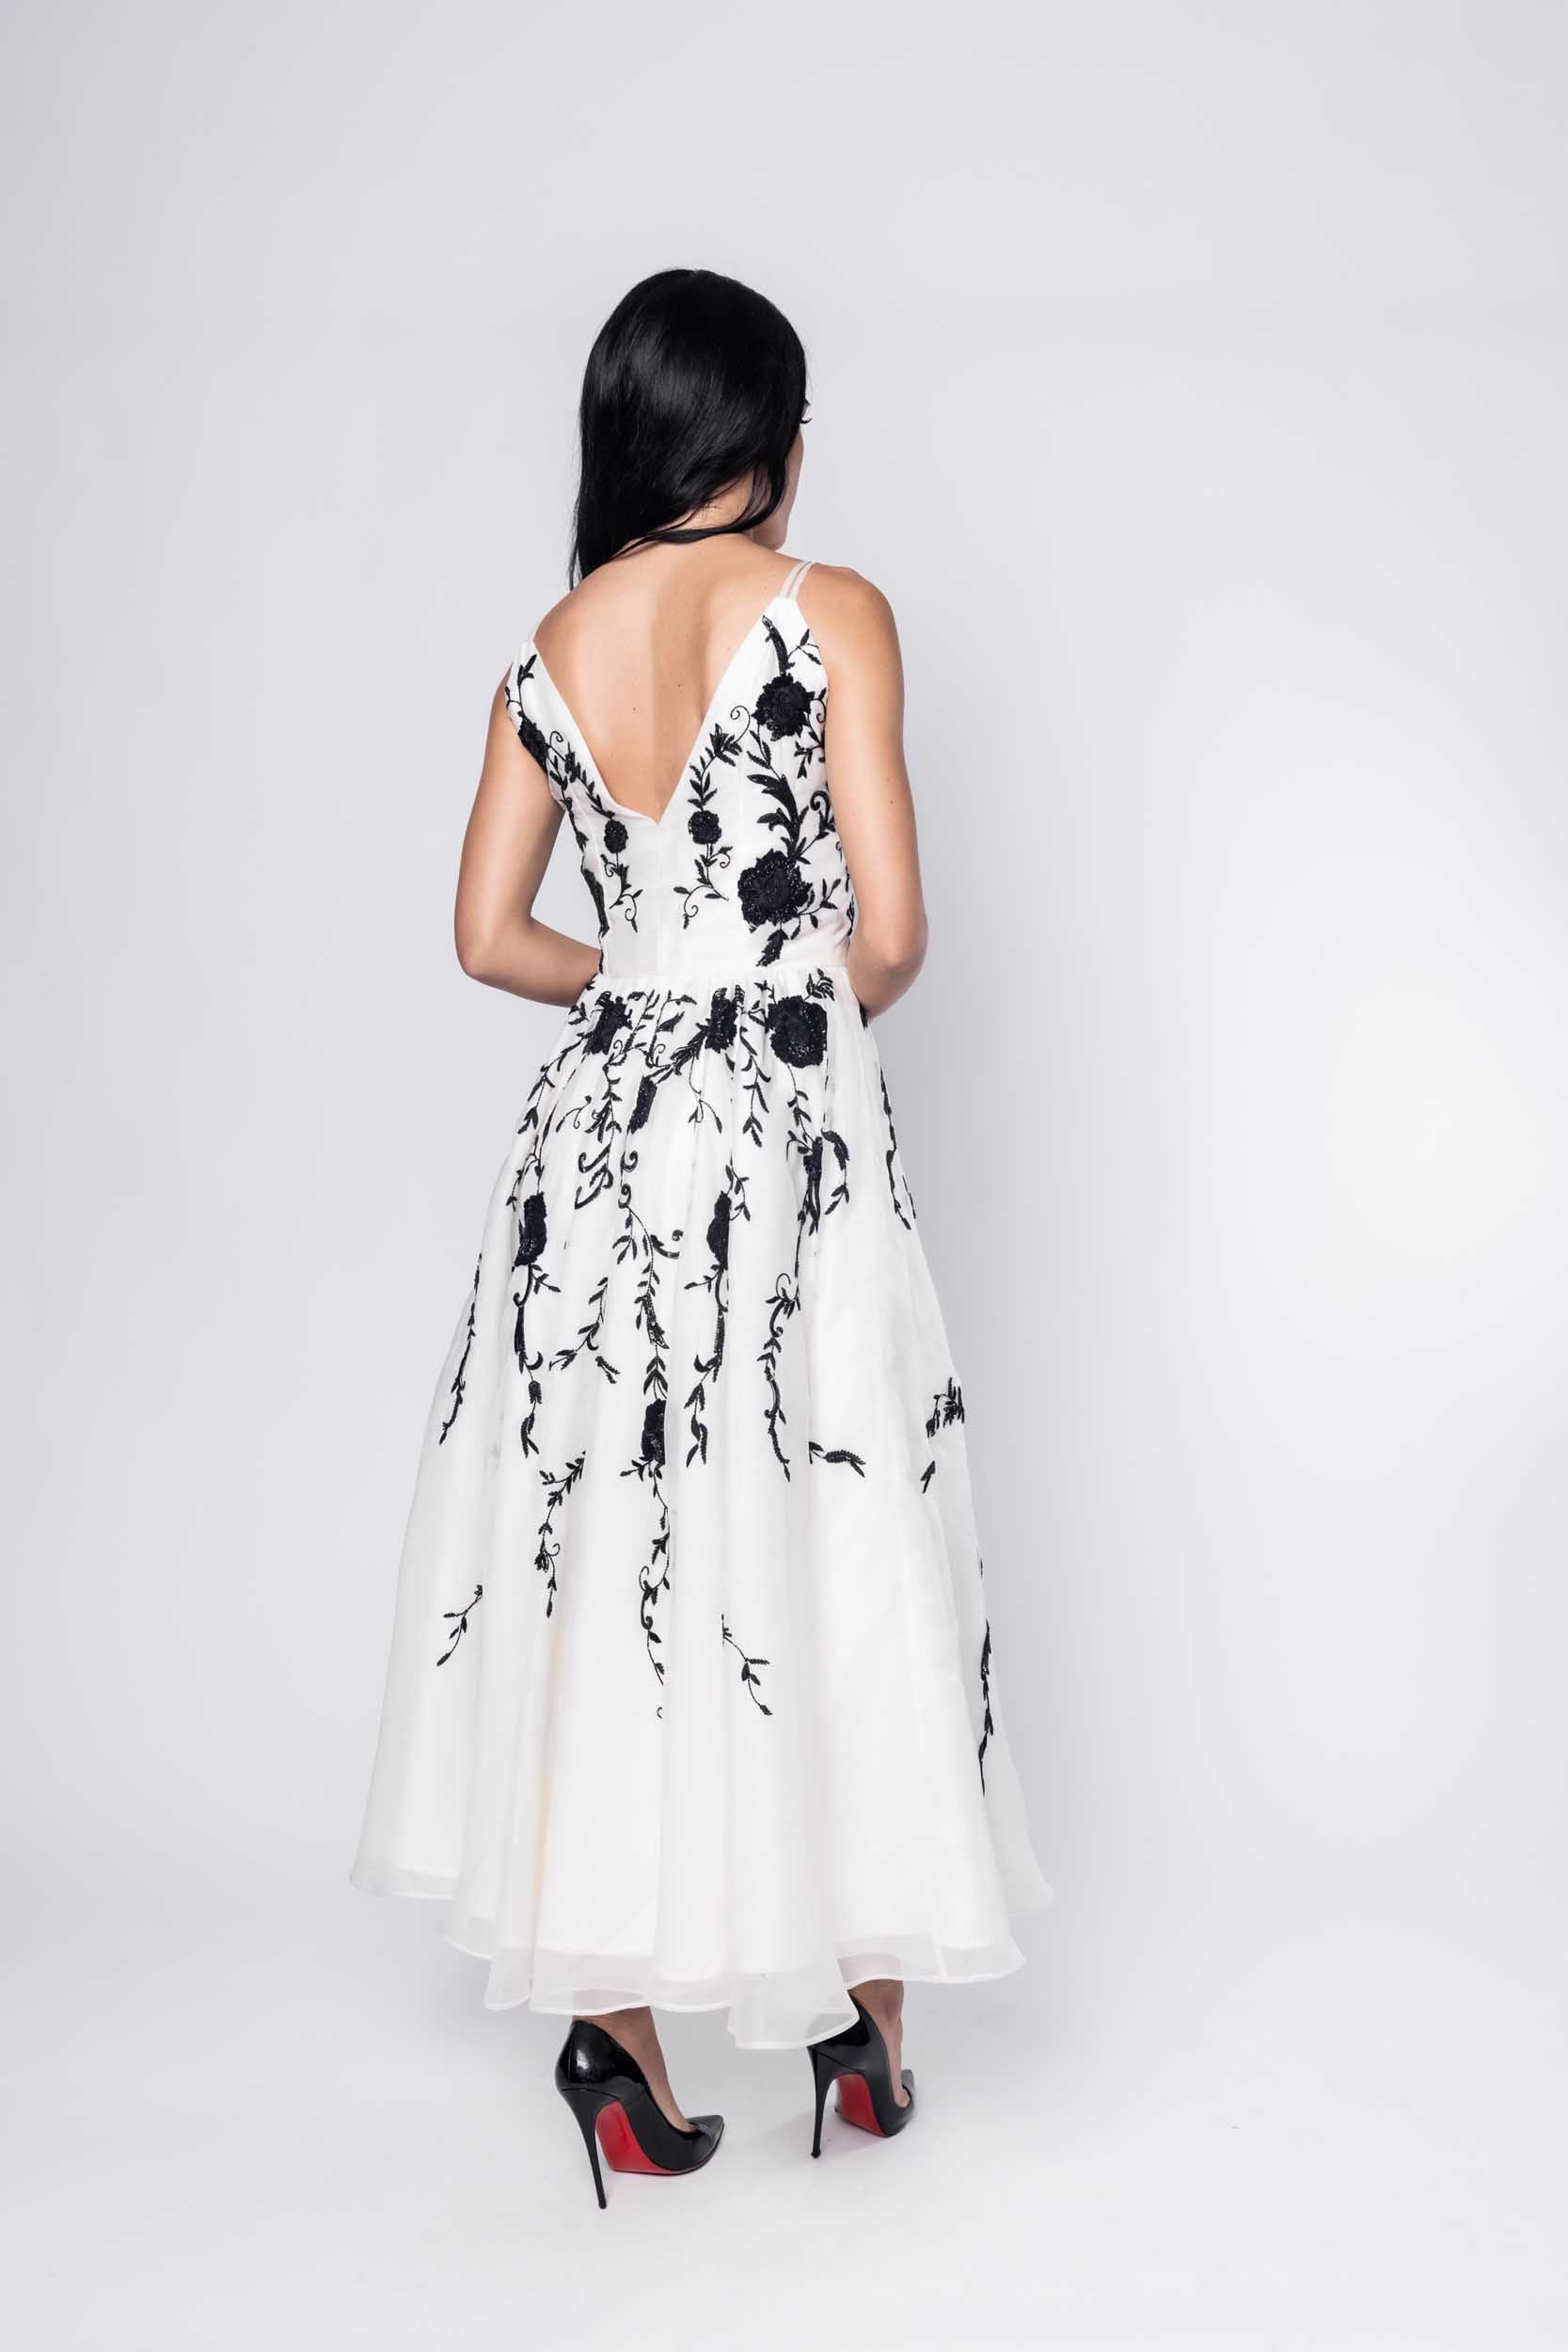 Gorgeous model in an ornate black and white Sujata Gazder dress - back view